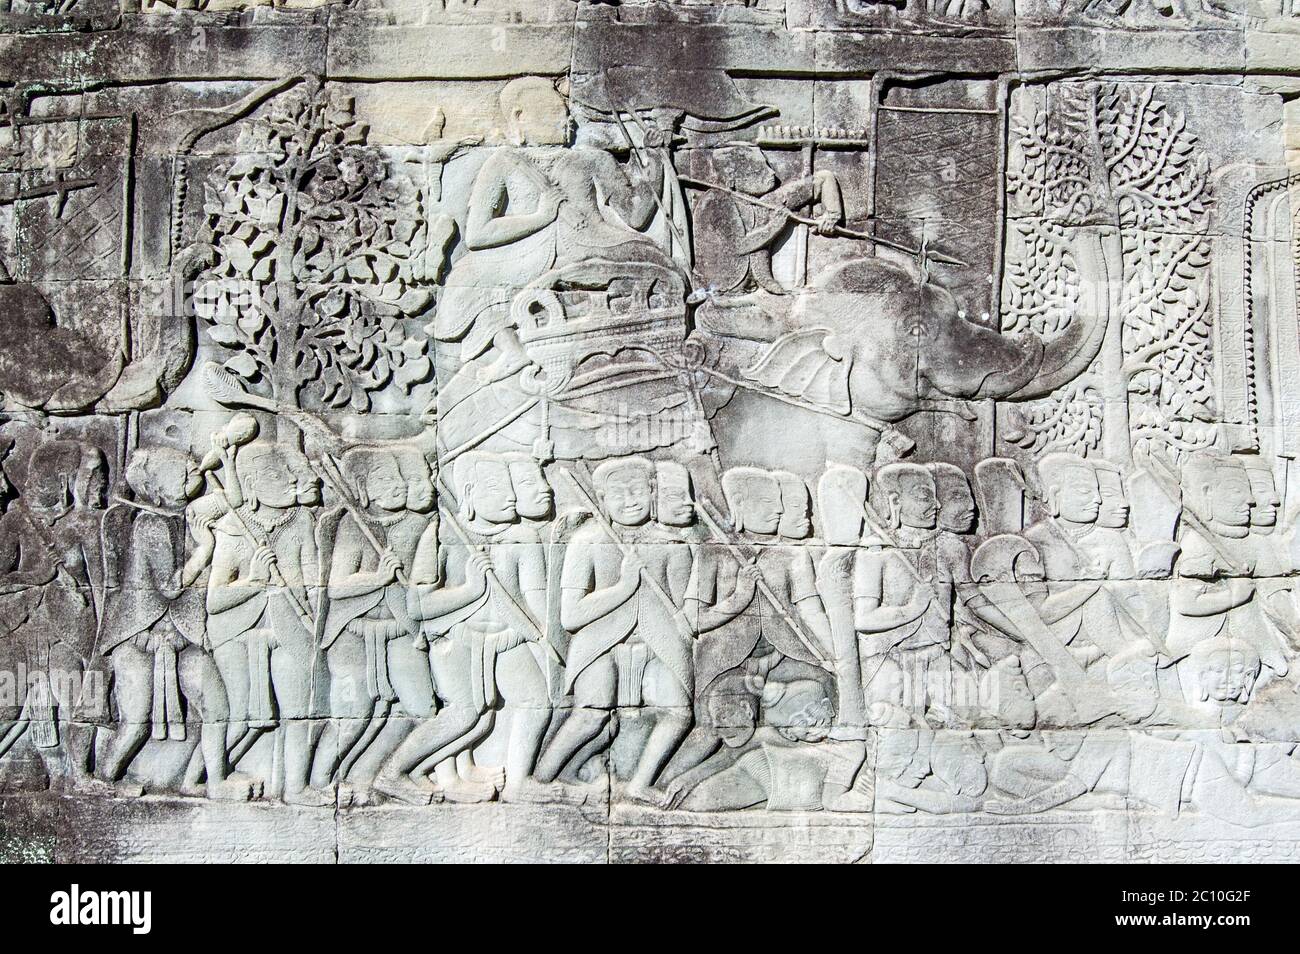 Ancient Khmer bas relief carving of an army commander riding an Elephant  into battle. Outer wall of Bayon Temple, Angkor Thom, Siem Reap, Cambodia  Stock Photo - Alamy